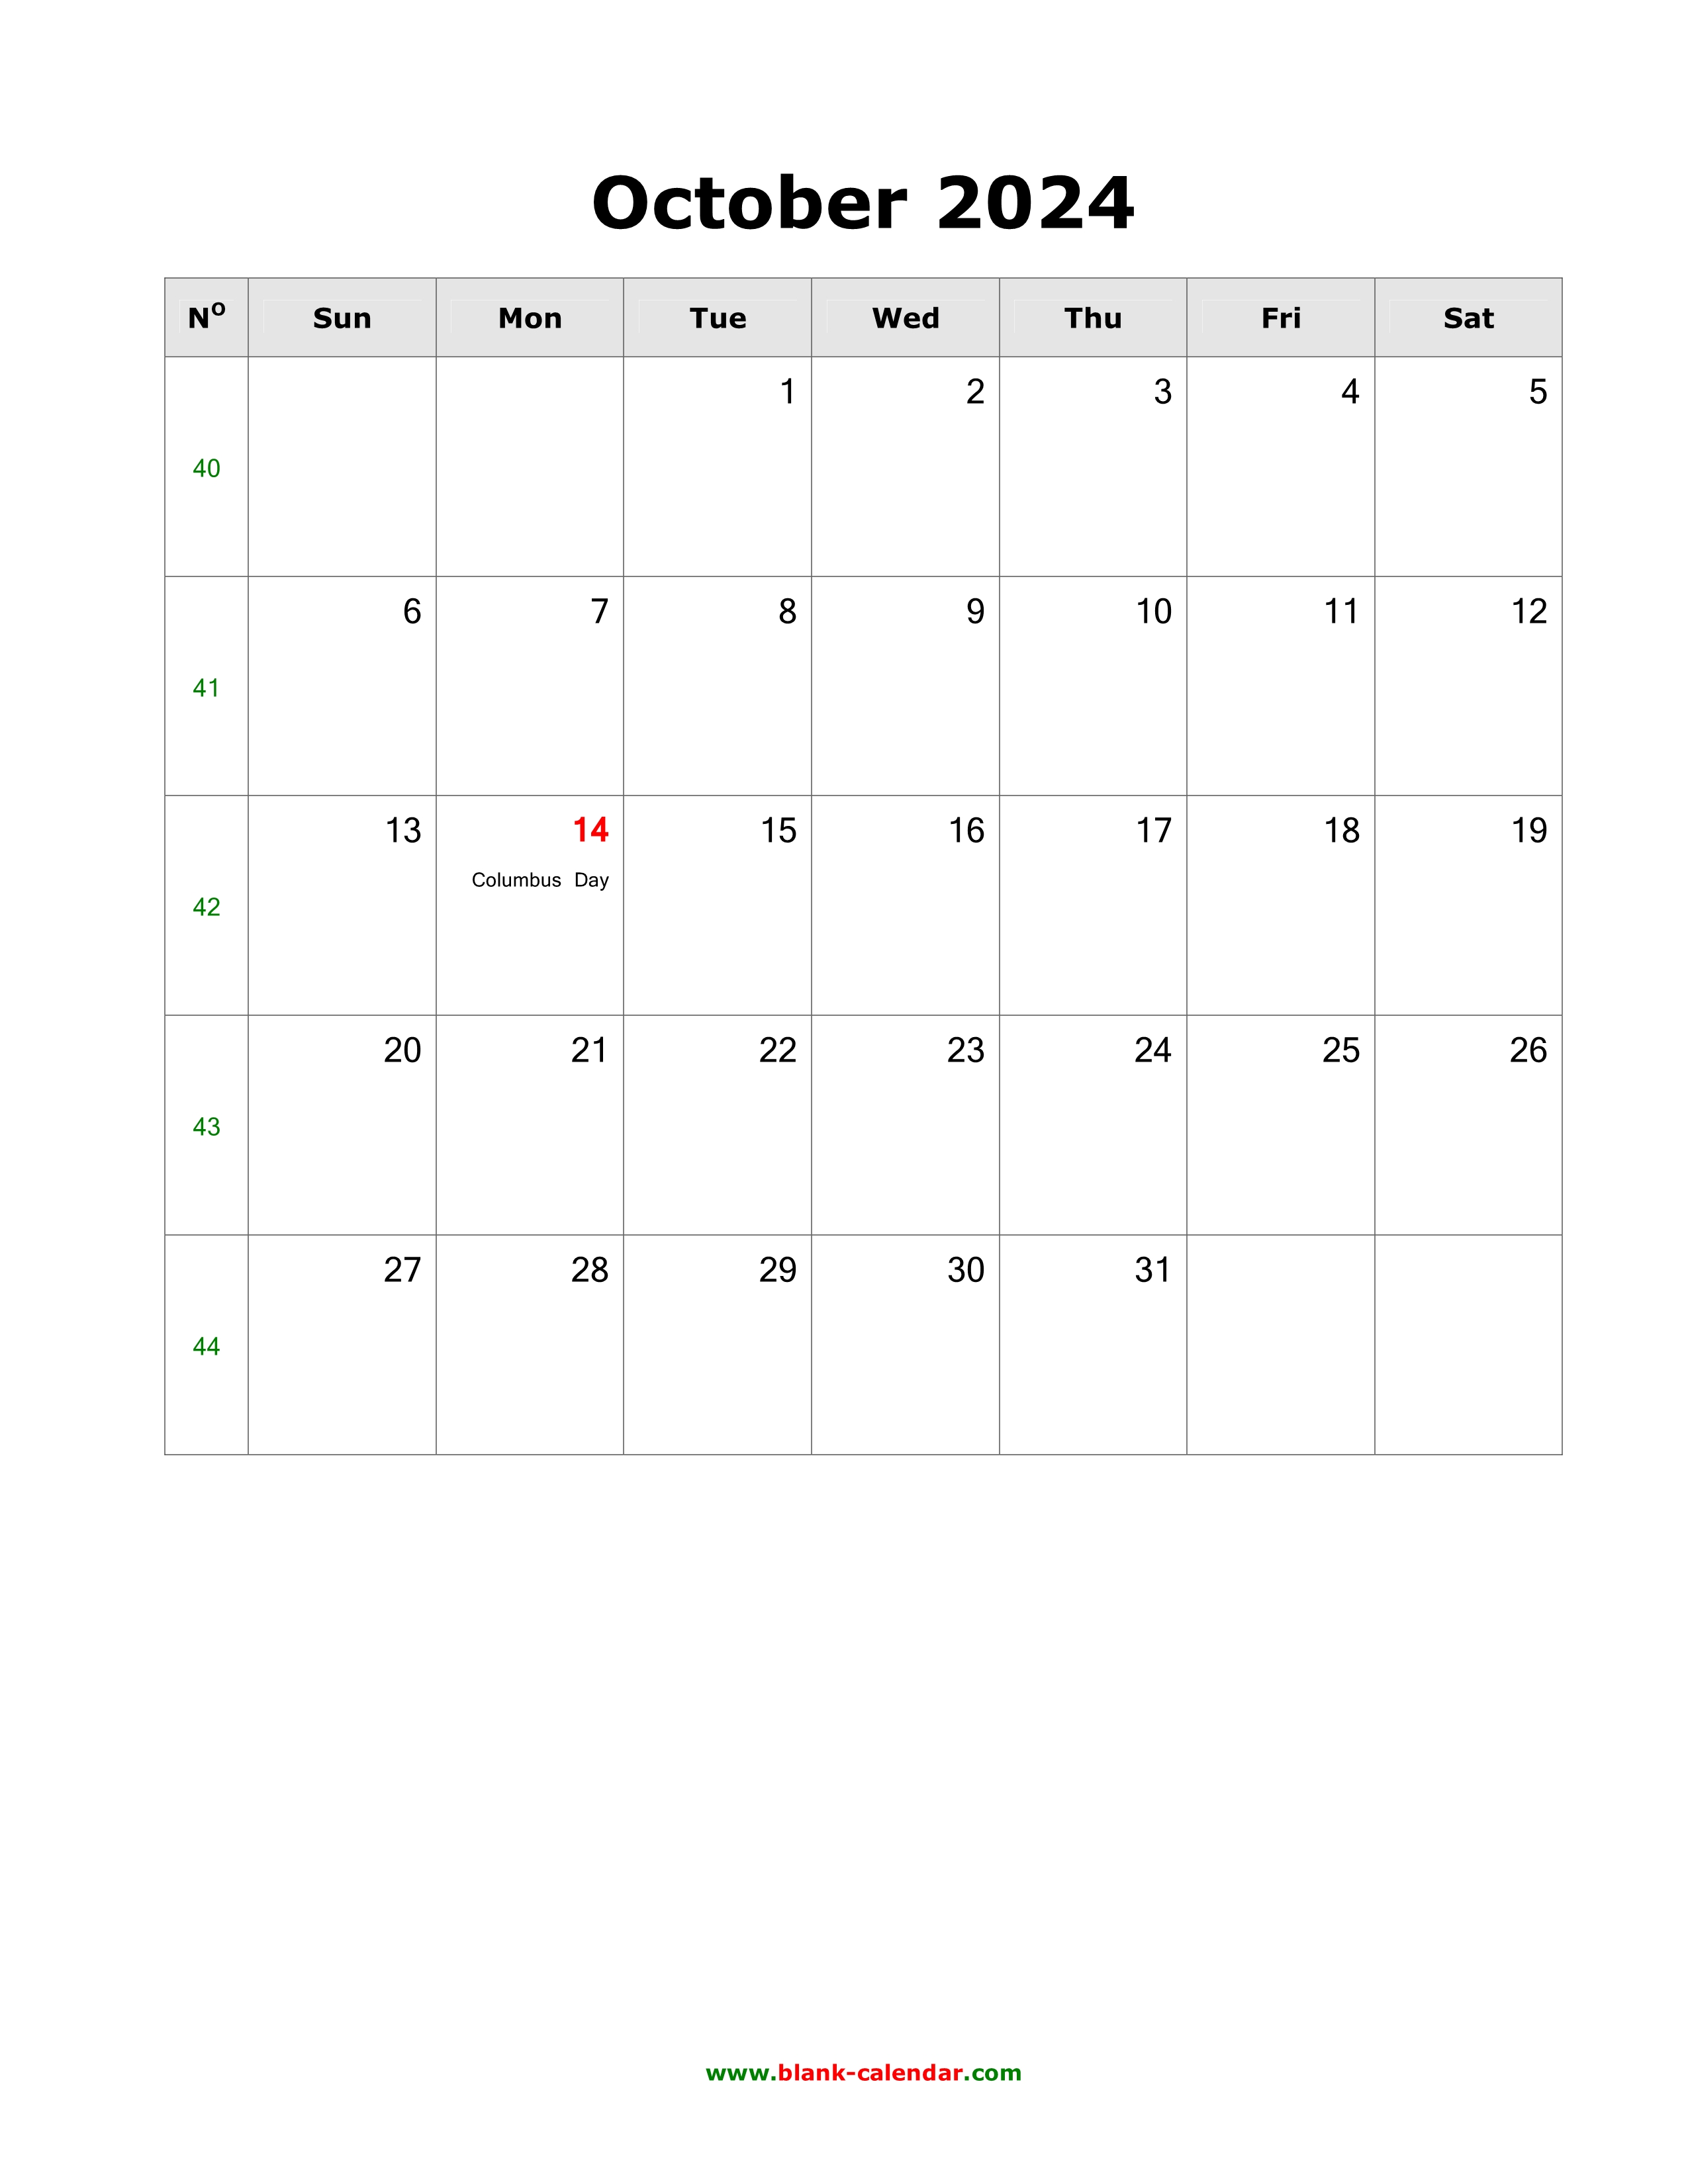 Download October 2024 Blank Calendar with US Holidays (vertical)